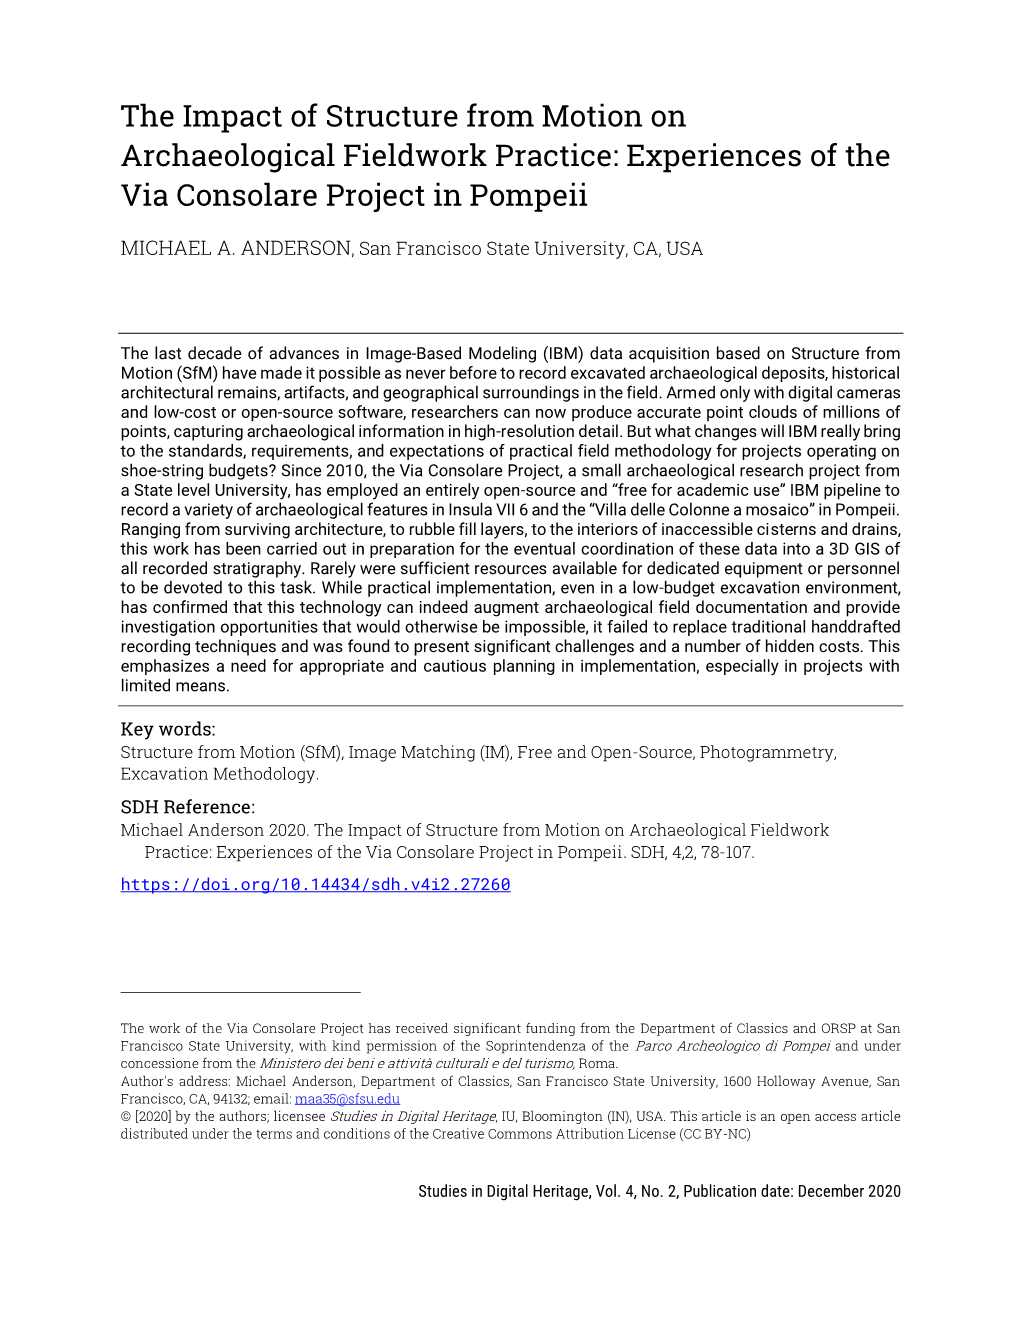 The Impact of Structure from Motion on Archaeological Fieldwork Practice: Experiences of the Via Consolare Project in Pompeii